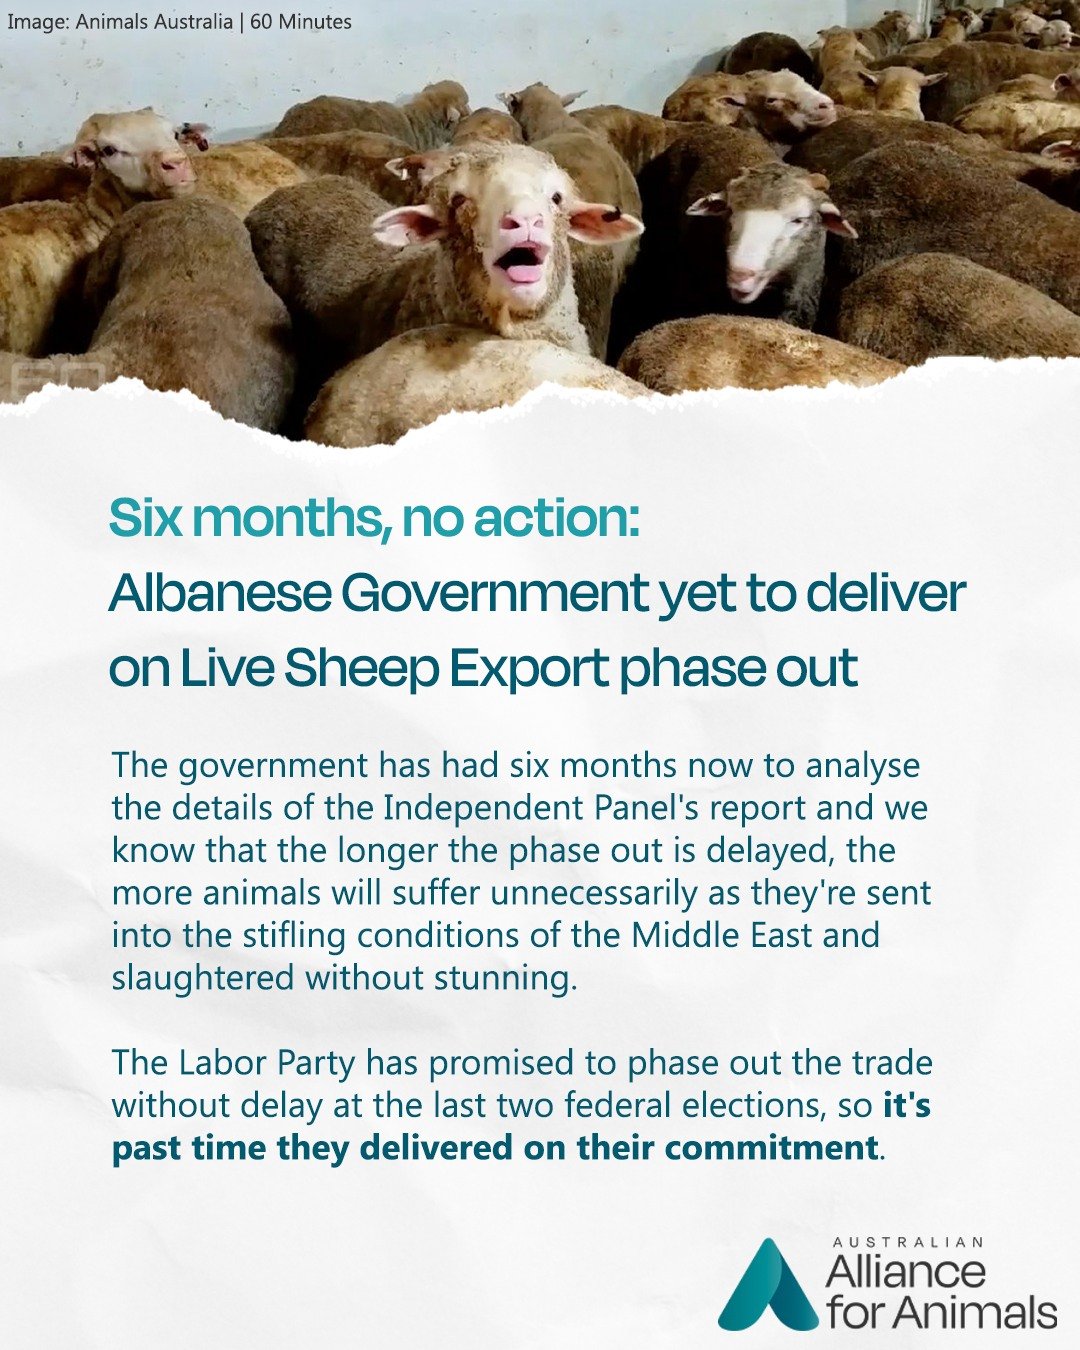 Six months ago, an independent panel provided its advice on the phase out of live sheep exports, yet the Albanese Government has failed to set a firm end date to the cruel trade.
 
Every day of inaction prolongs the suffering for countless sheep.
 
W